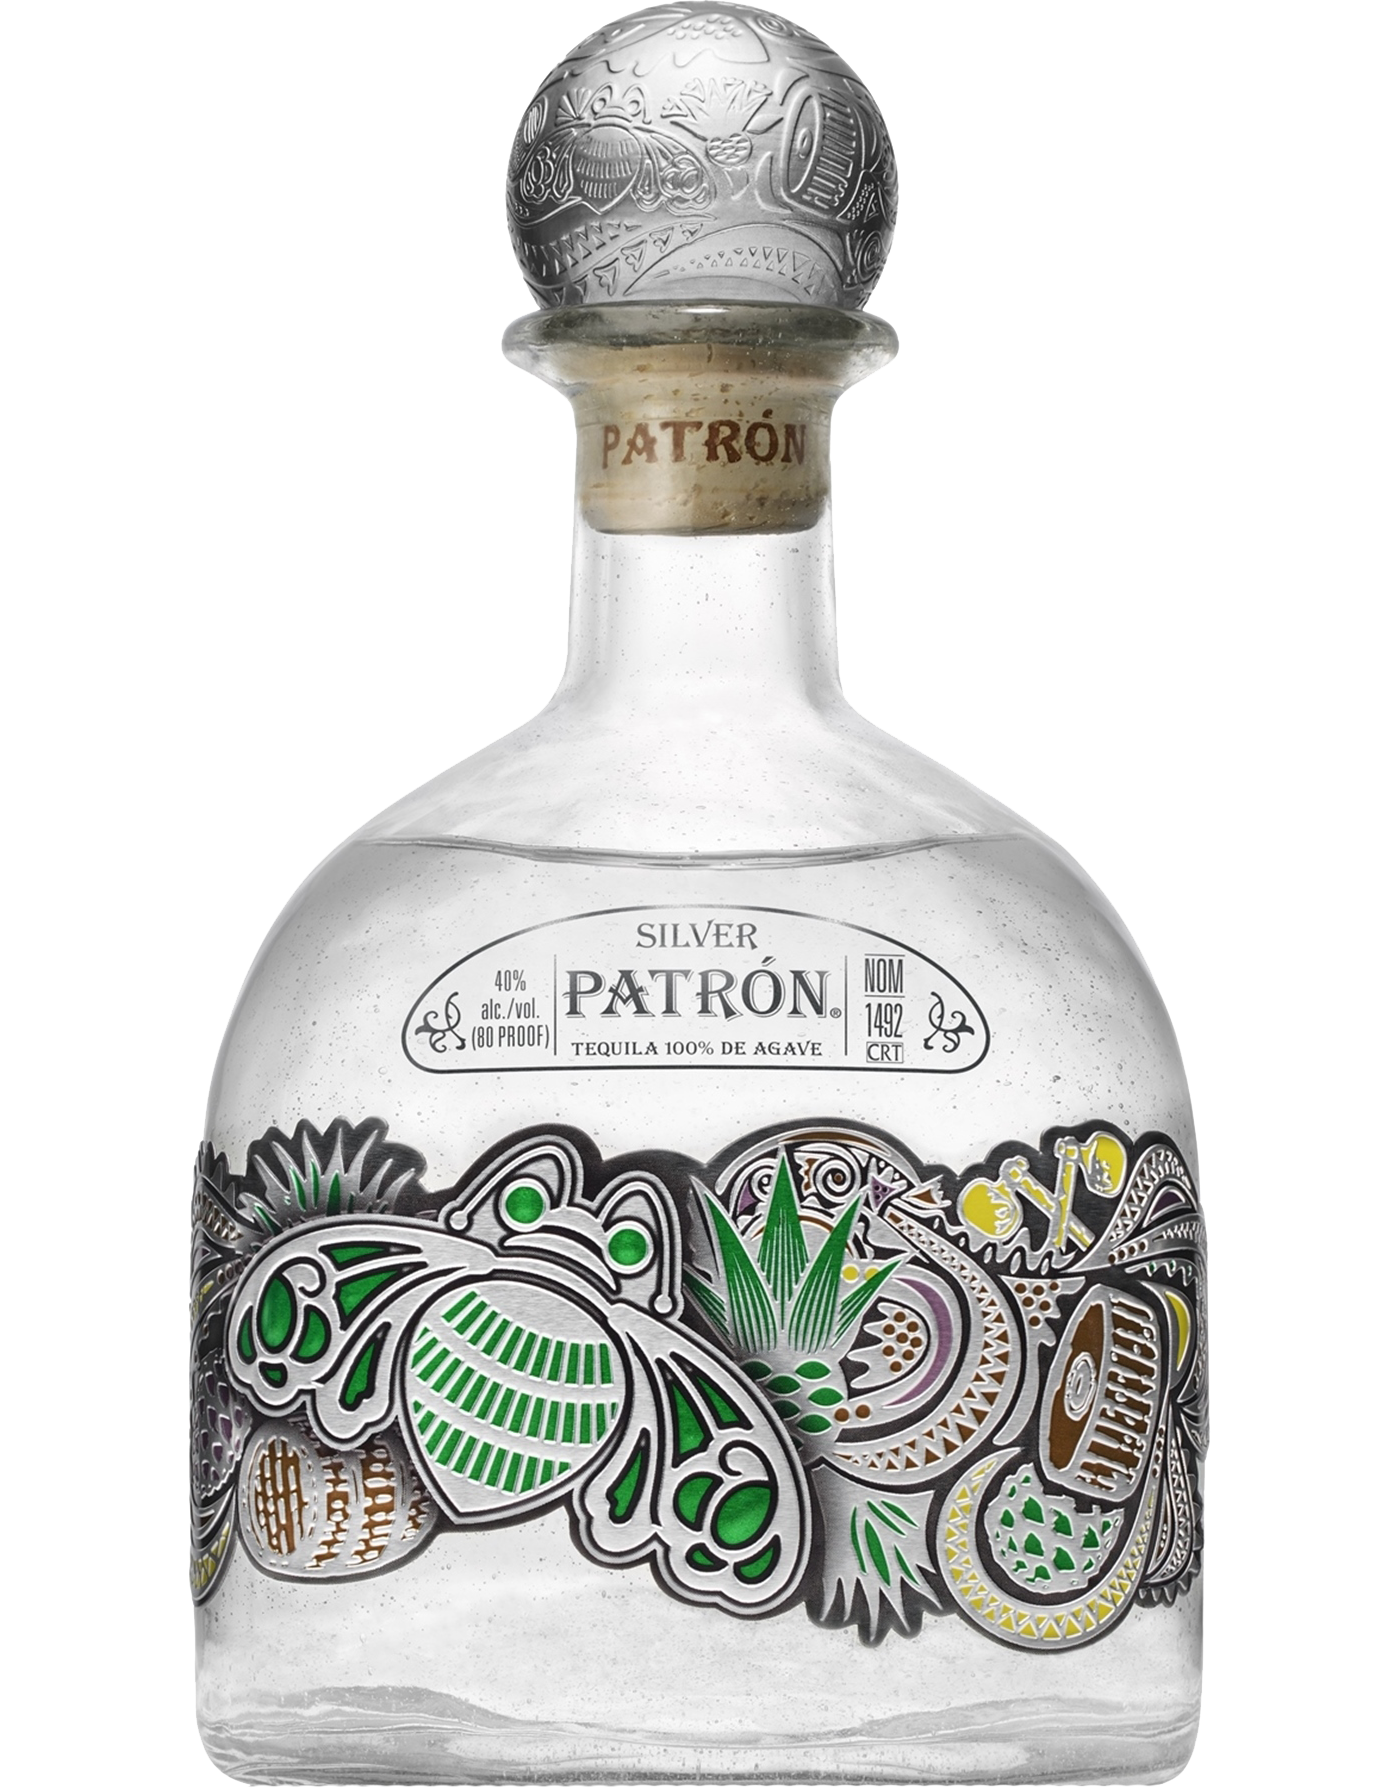 Patron Tequila Silver Limited Edition 1L Bottle - Premium Tequila